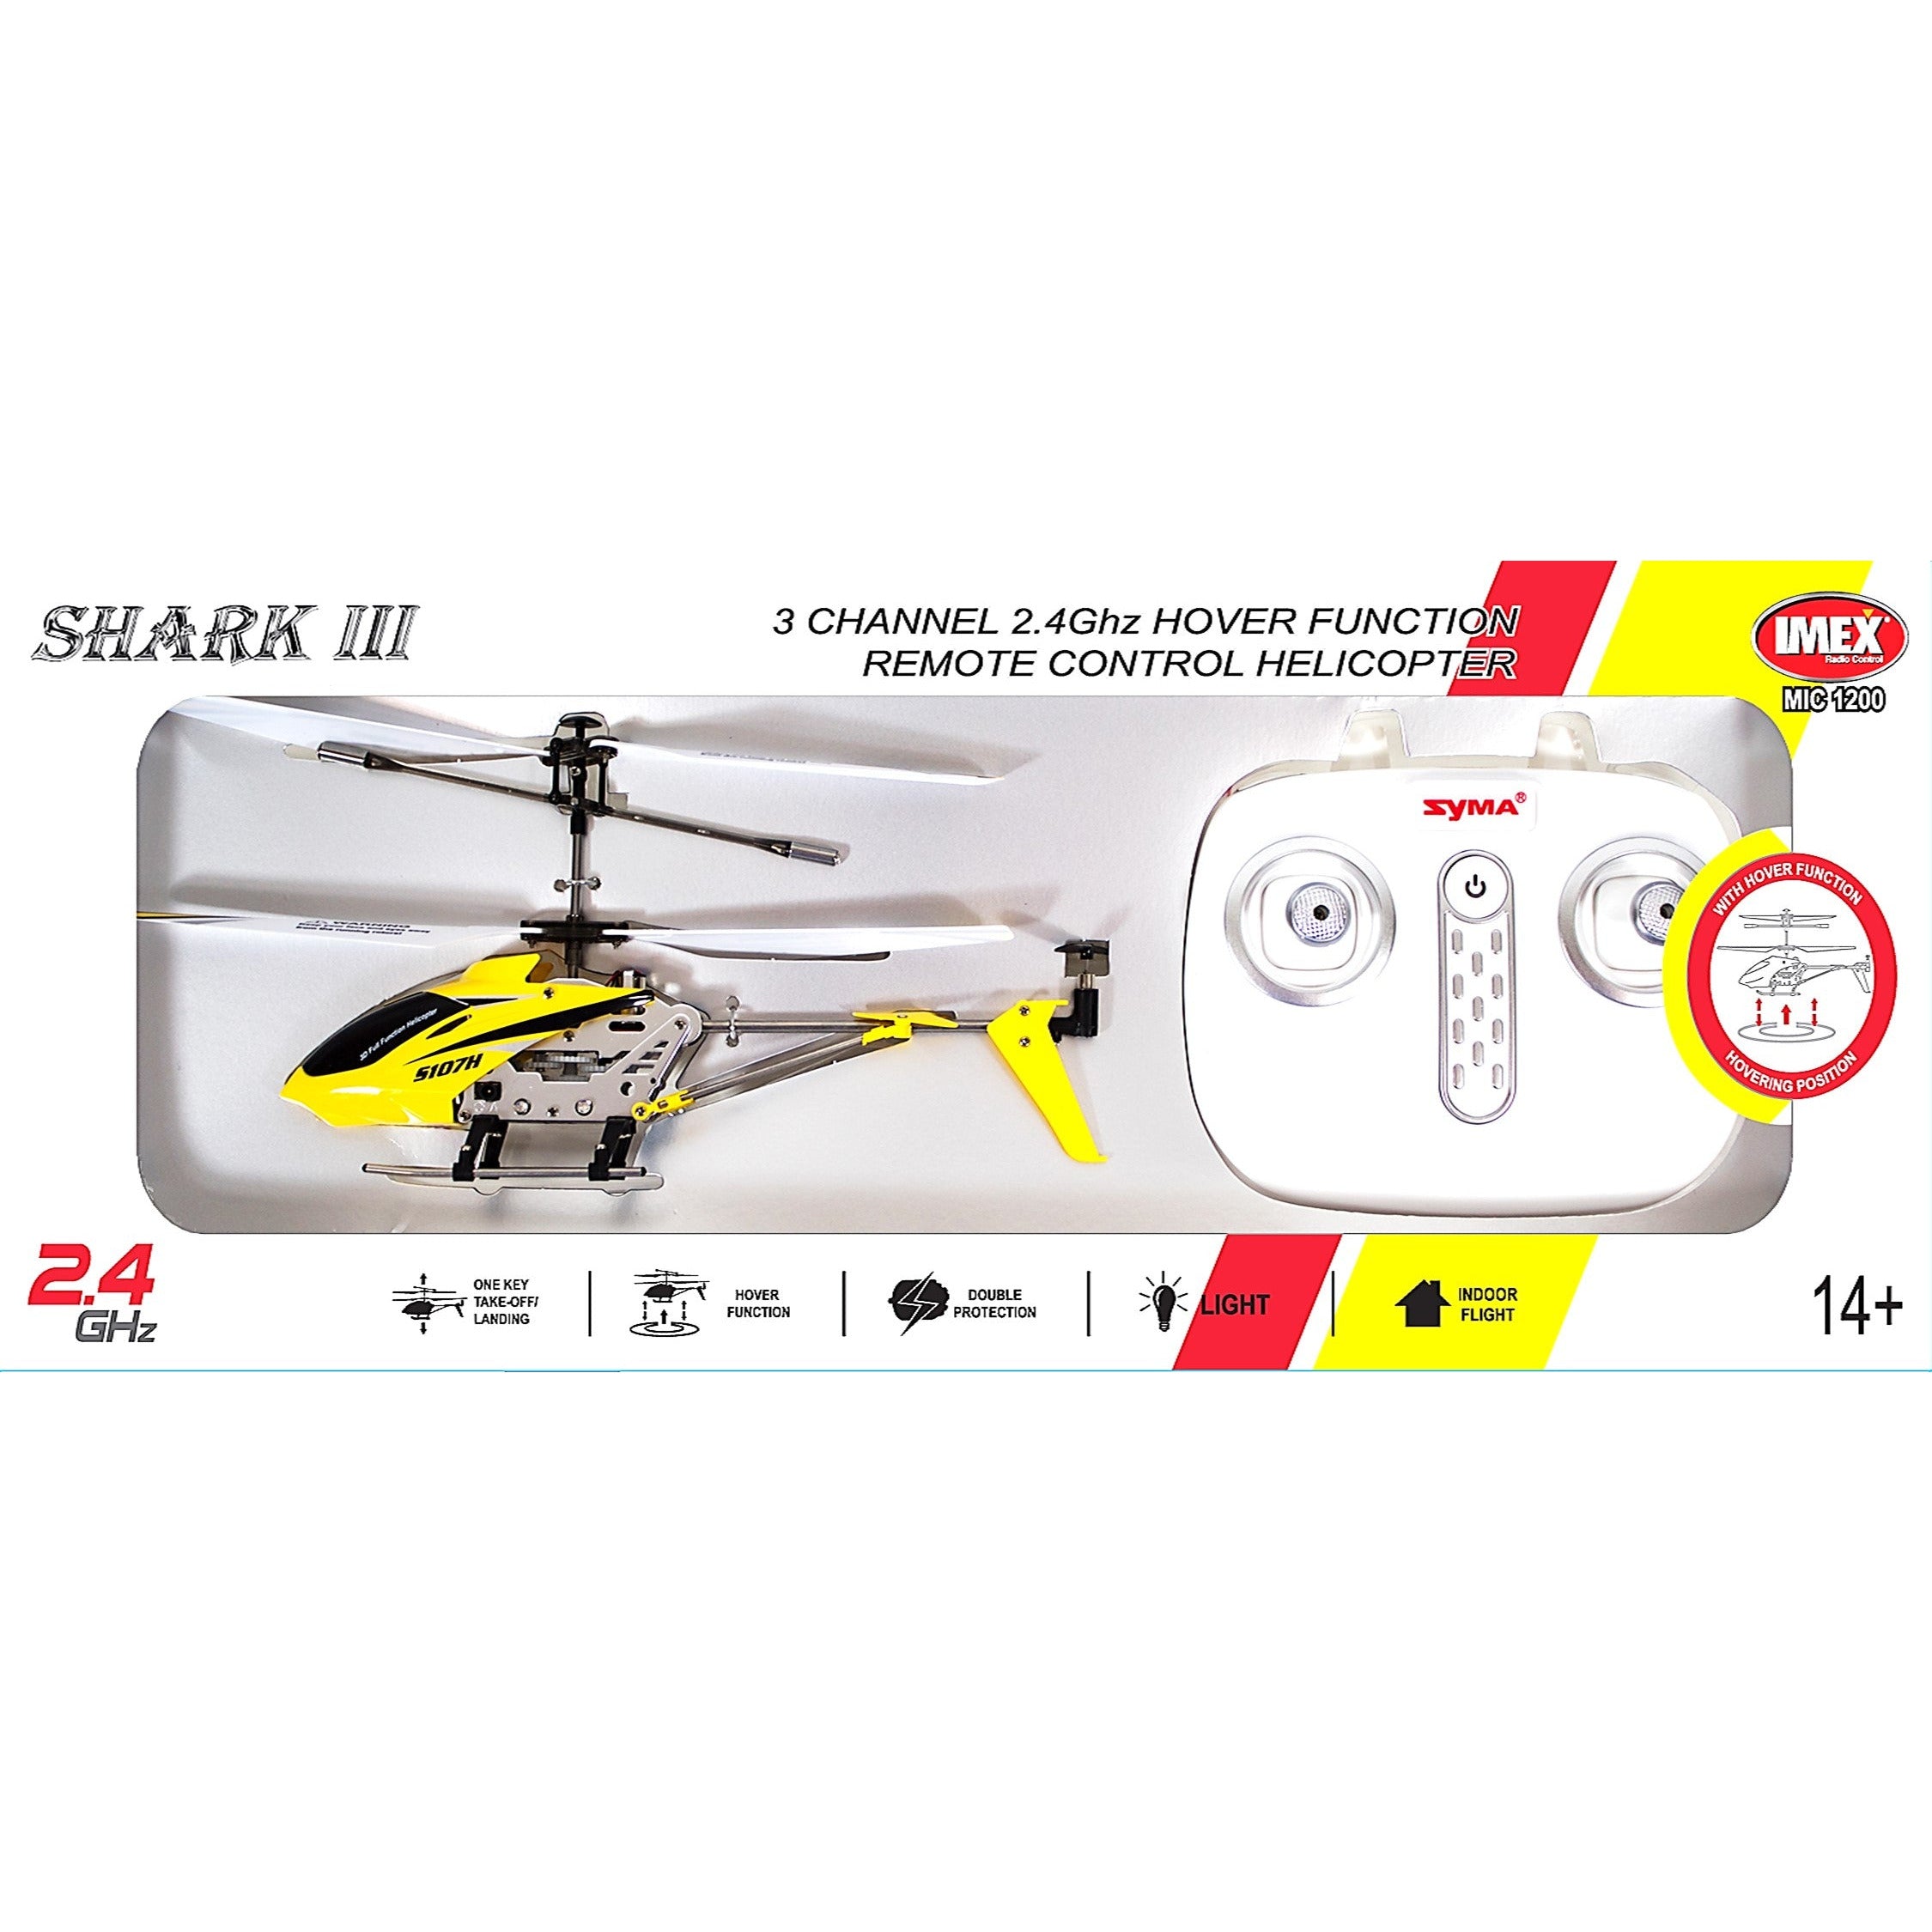 SHARK 3 Channel 2.4Ghz Gyro RC Helicopter